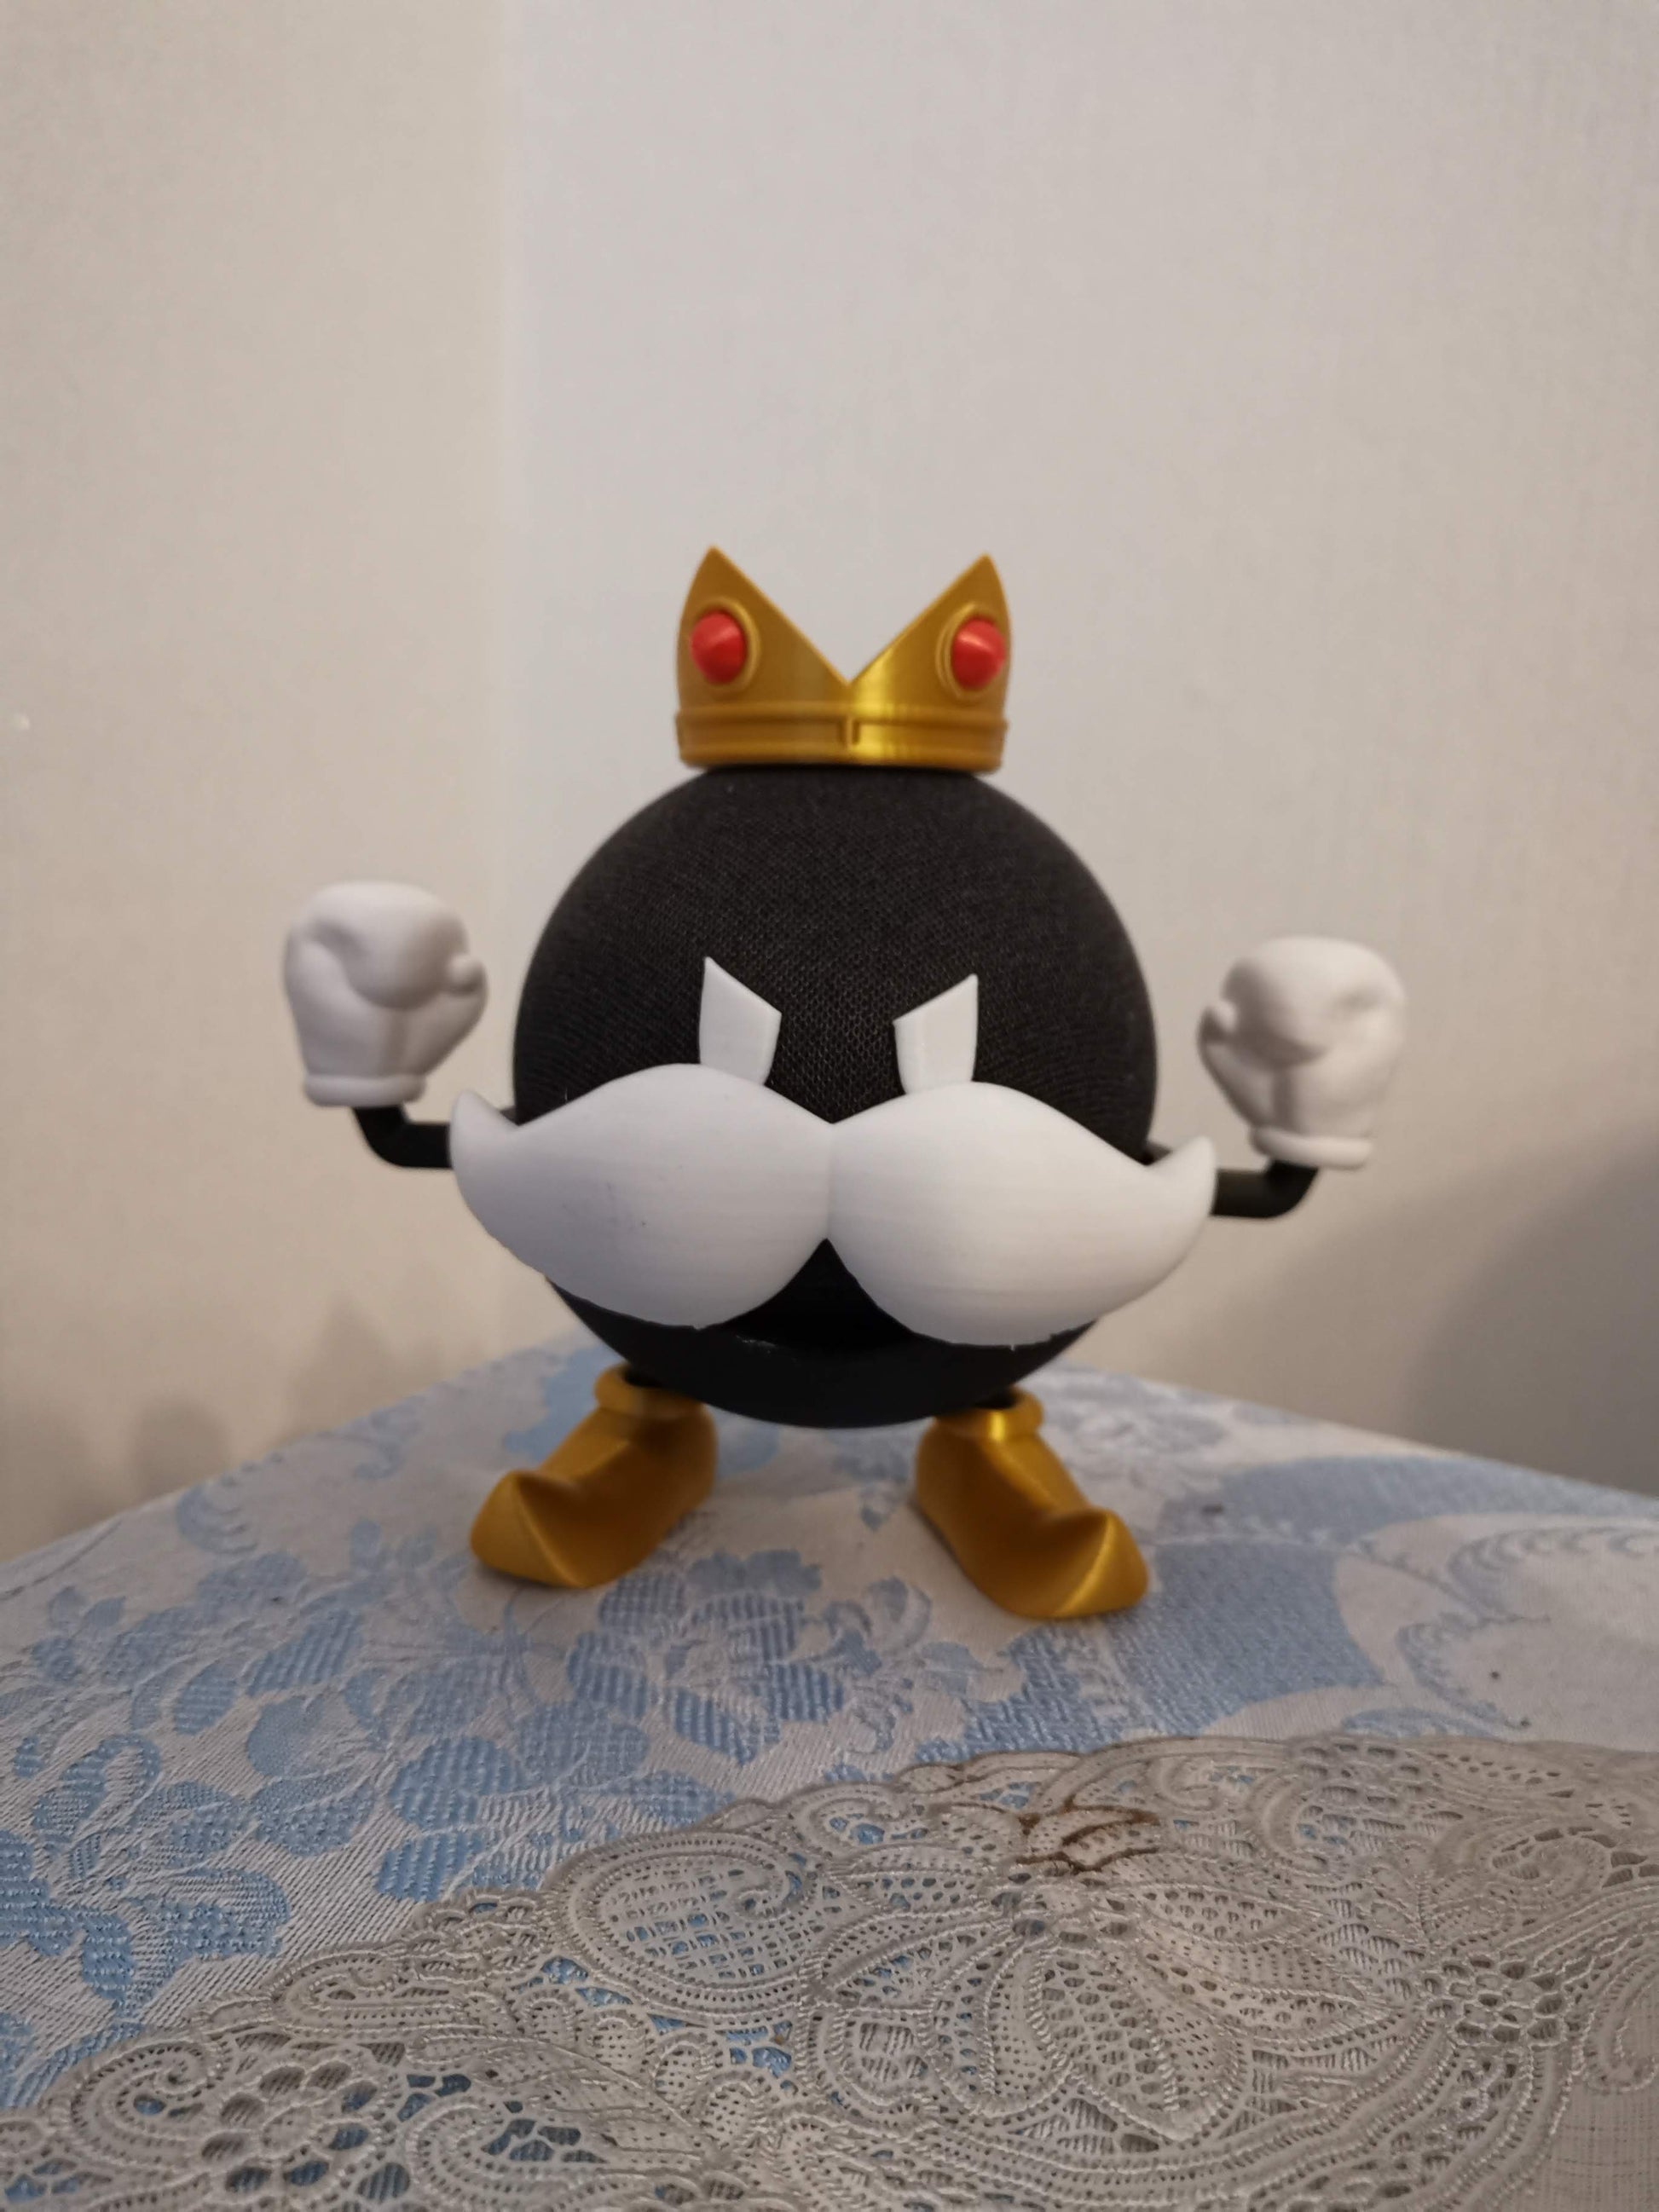 King Bomb-omb Alexa Echo holder with crown close up